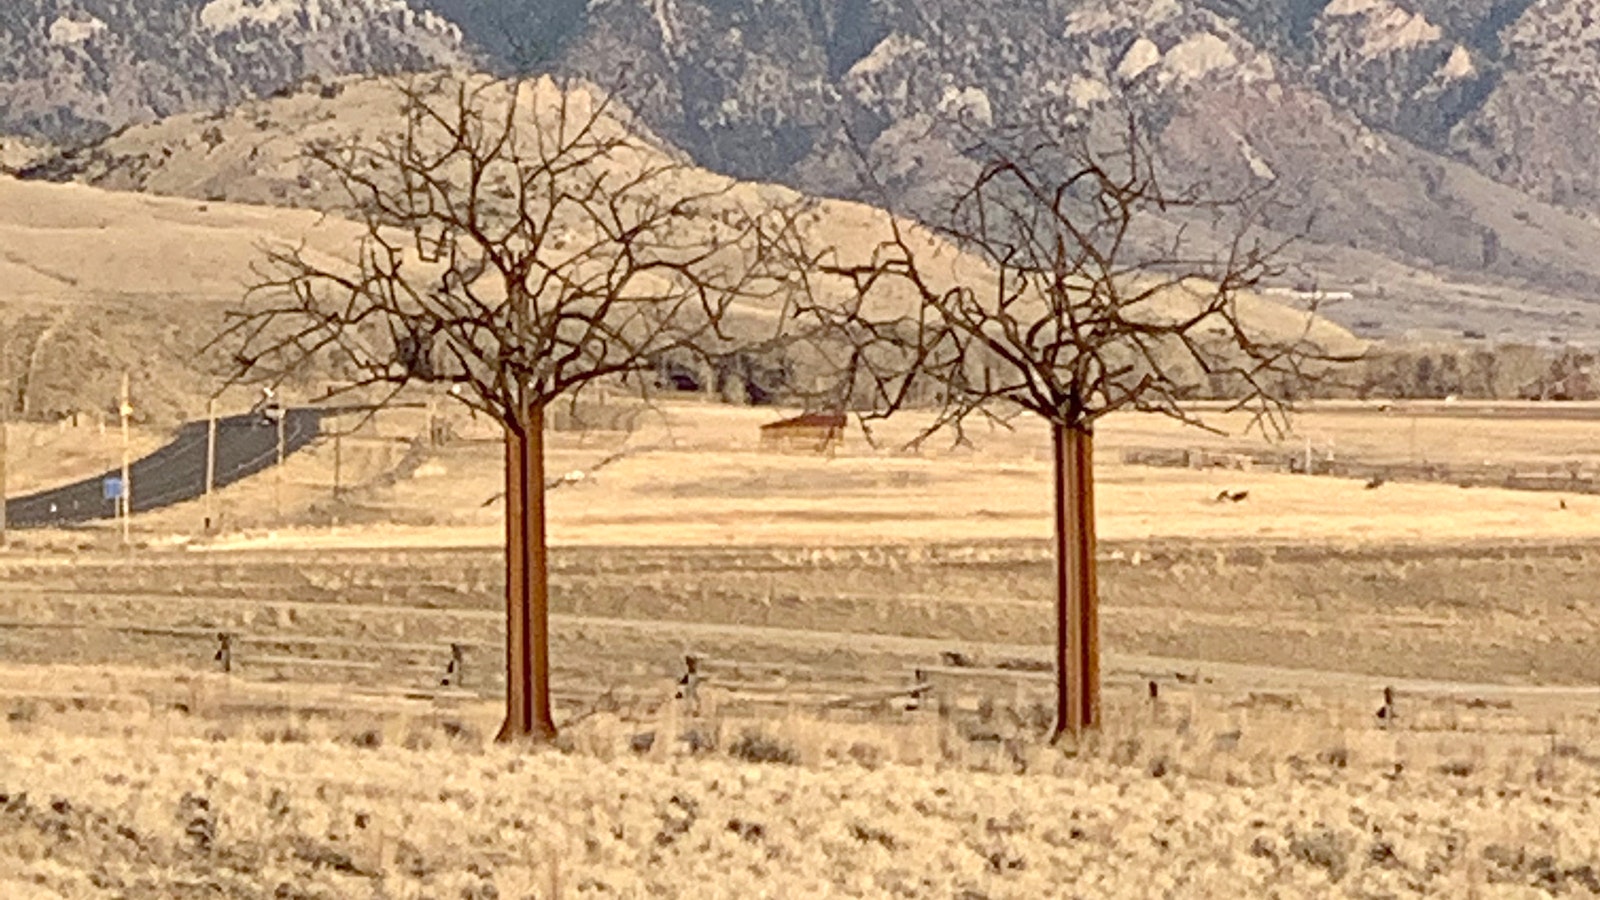 Artist James Geier is more than just a fan of Big Boy, he's also a sculptor. Some of his pieces can be seen on his land near Wapiti, Wyoming, like these titled "Winter Trees."